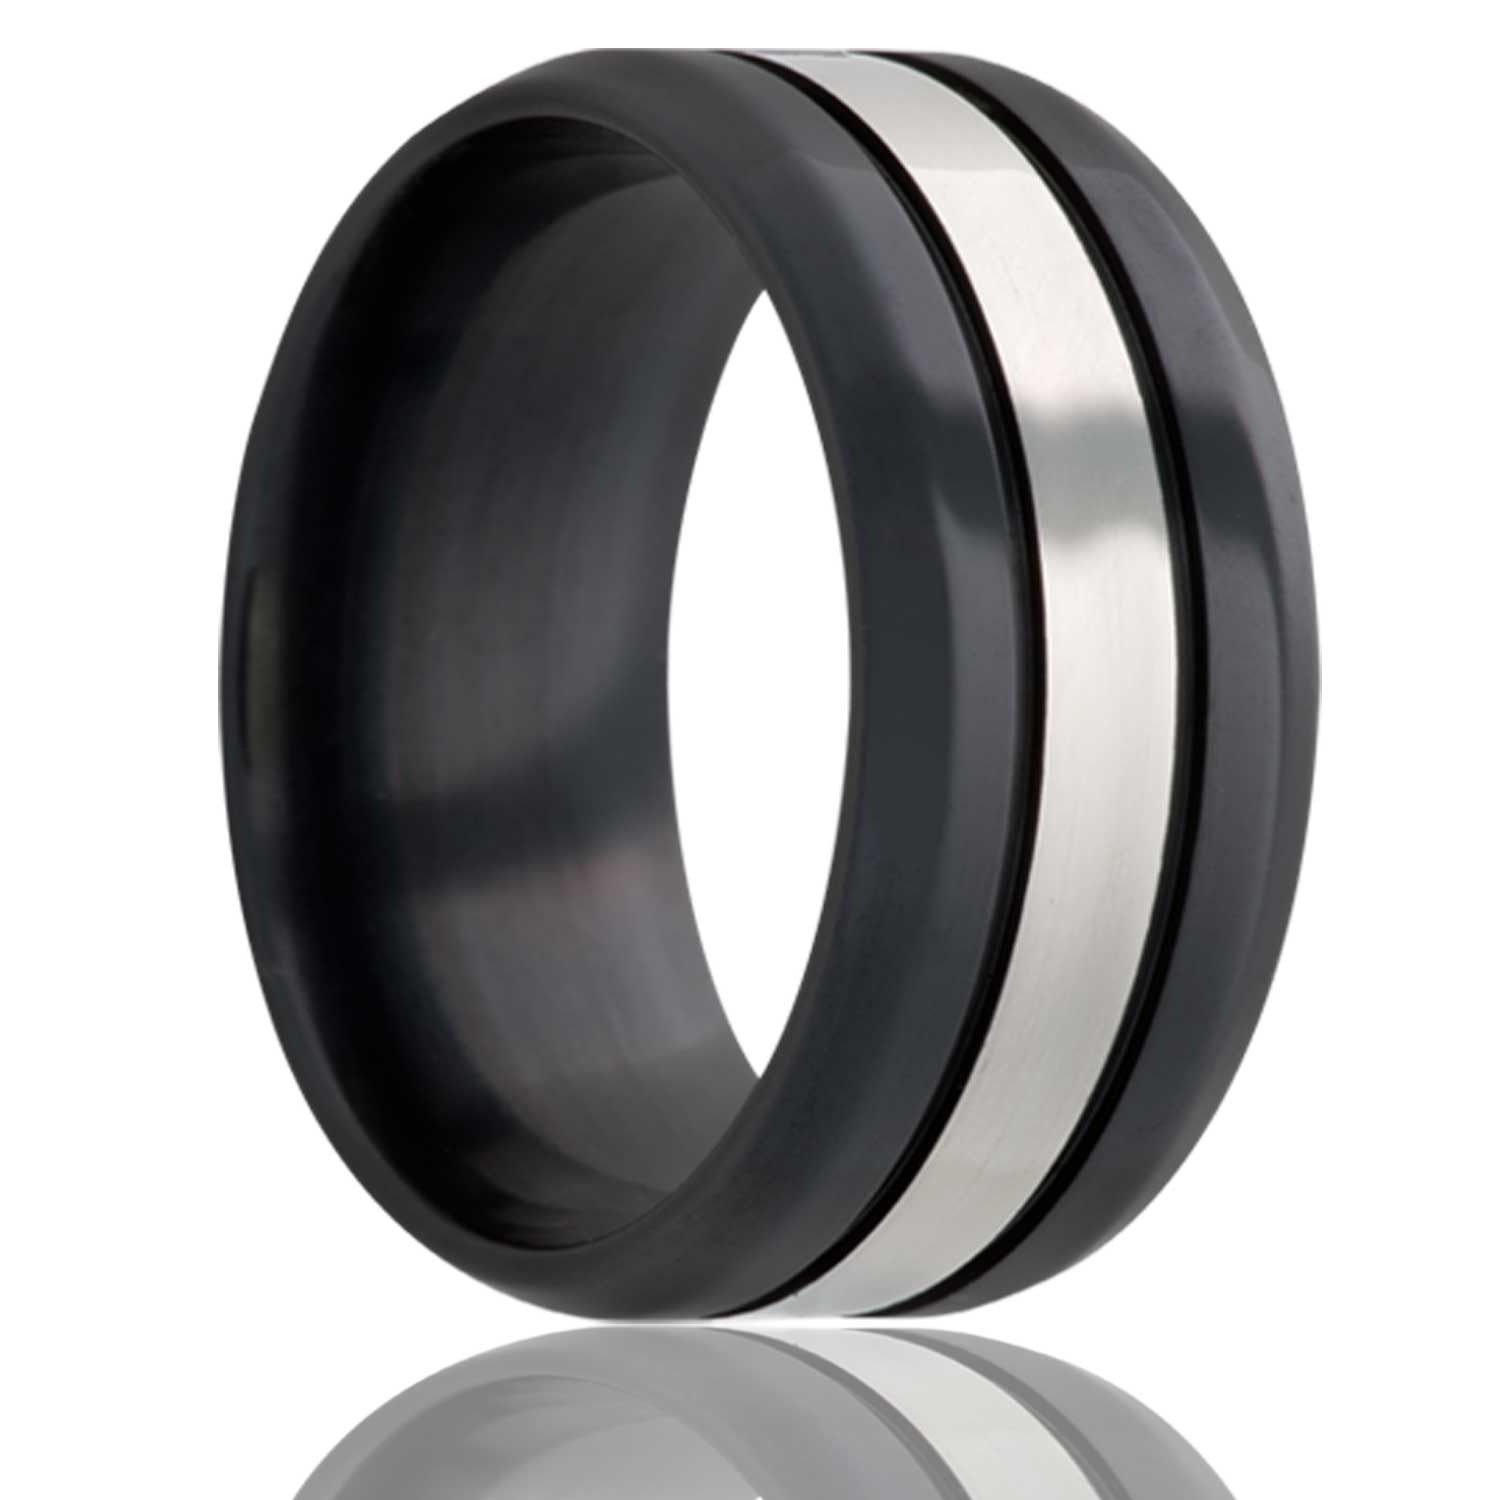 A grooved zirconium wedding band with beveled edges displayed on a neutral white background.